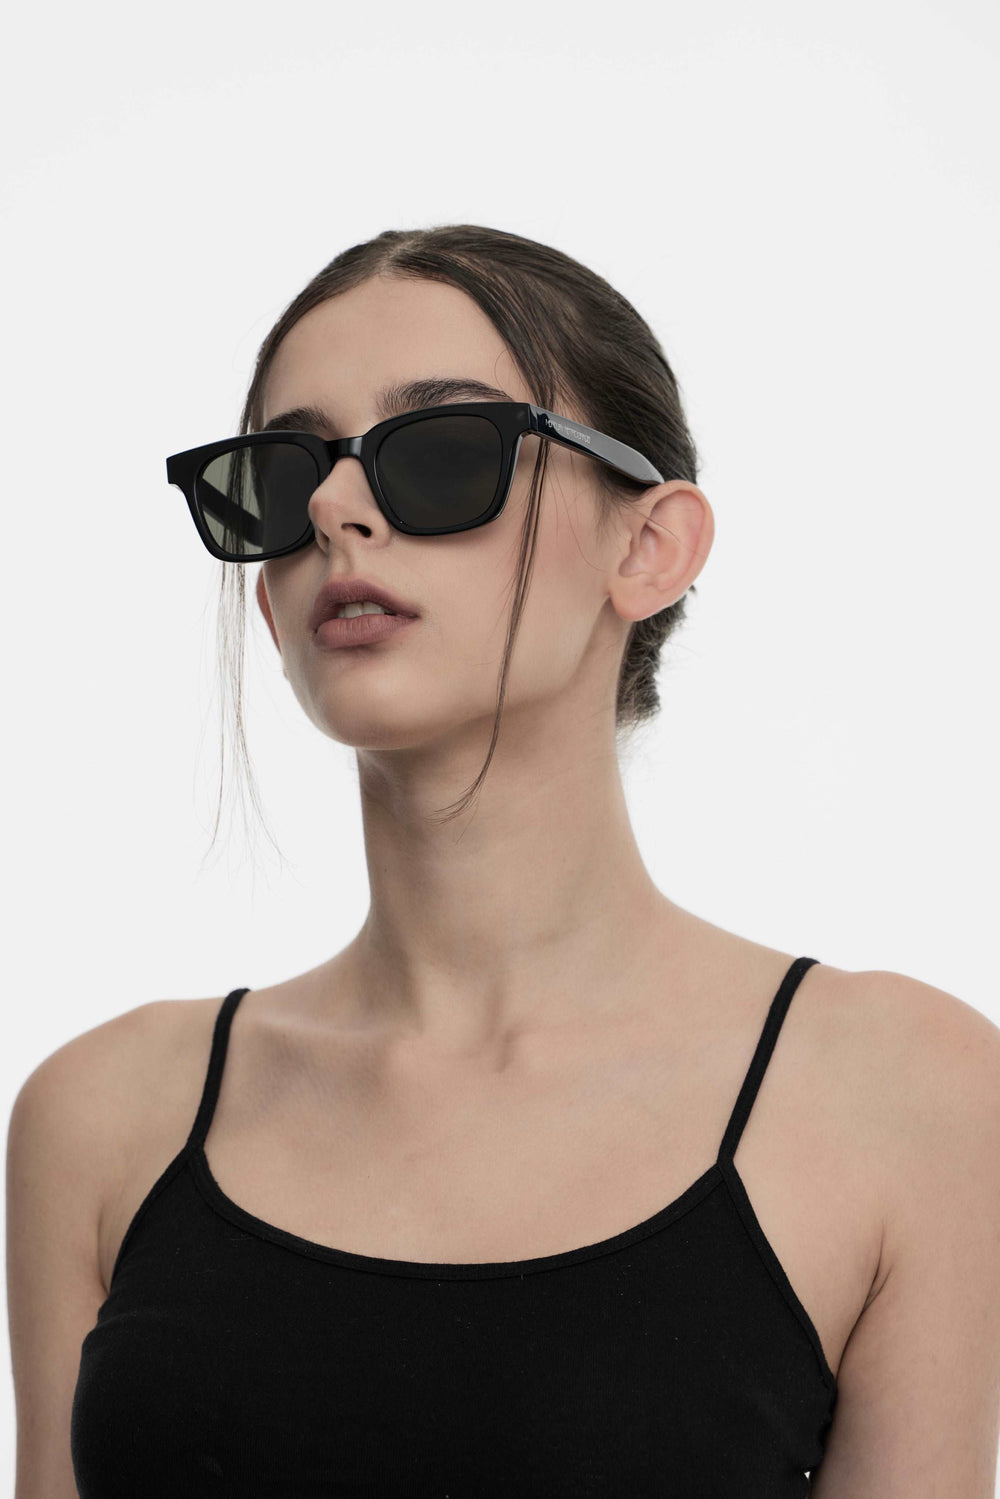 Model of her side face looking up wearing Bubblegum in black square Kpop Sunglasses from Mercury Retrograde Daydream Collection 